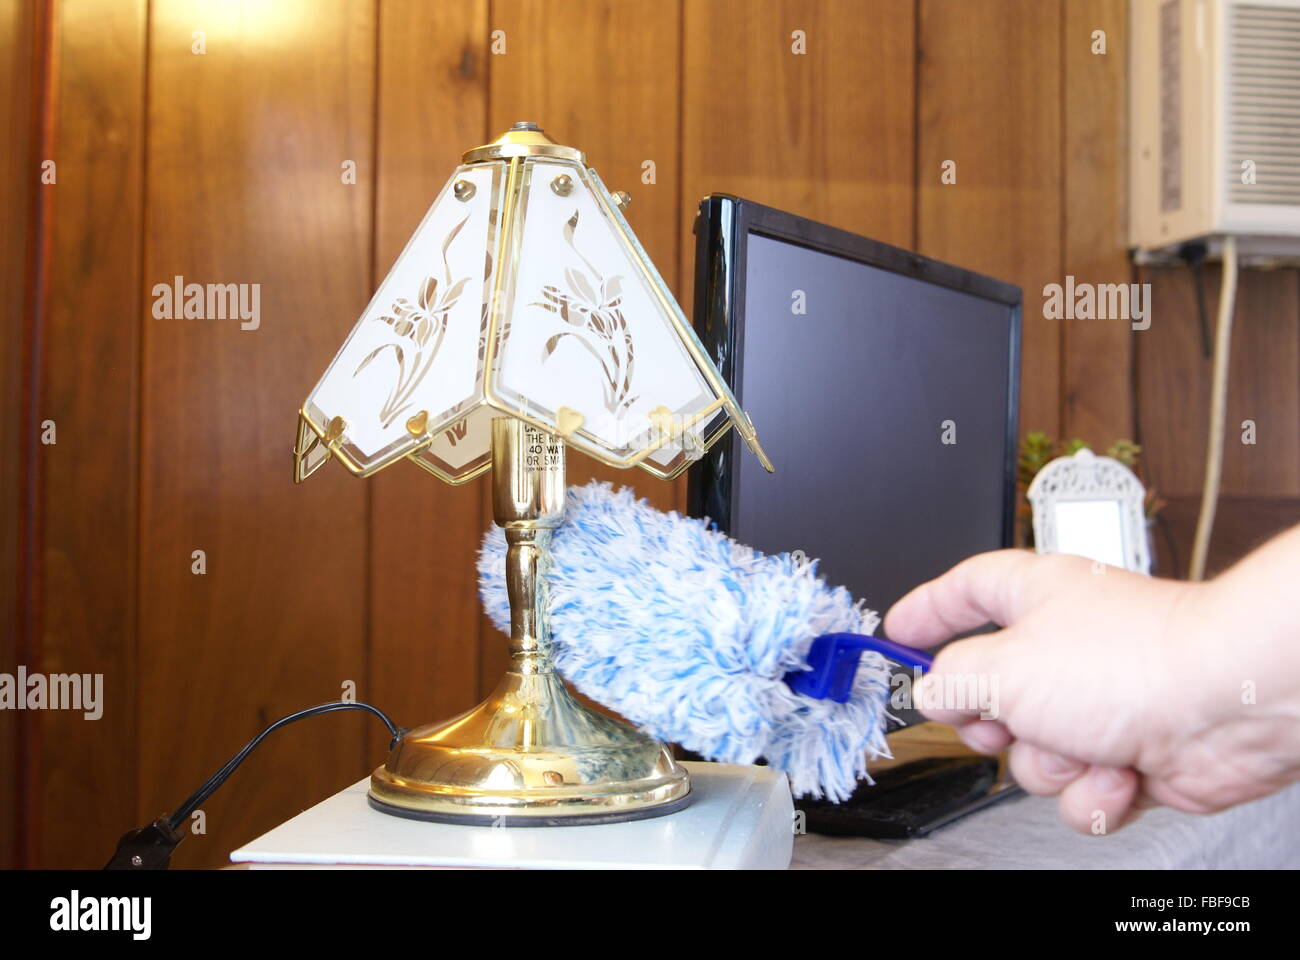 Feather dusting a small table lamp. Stock Photo